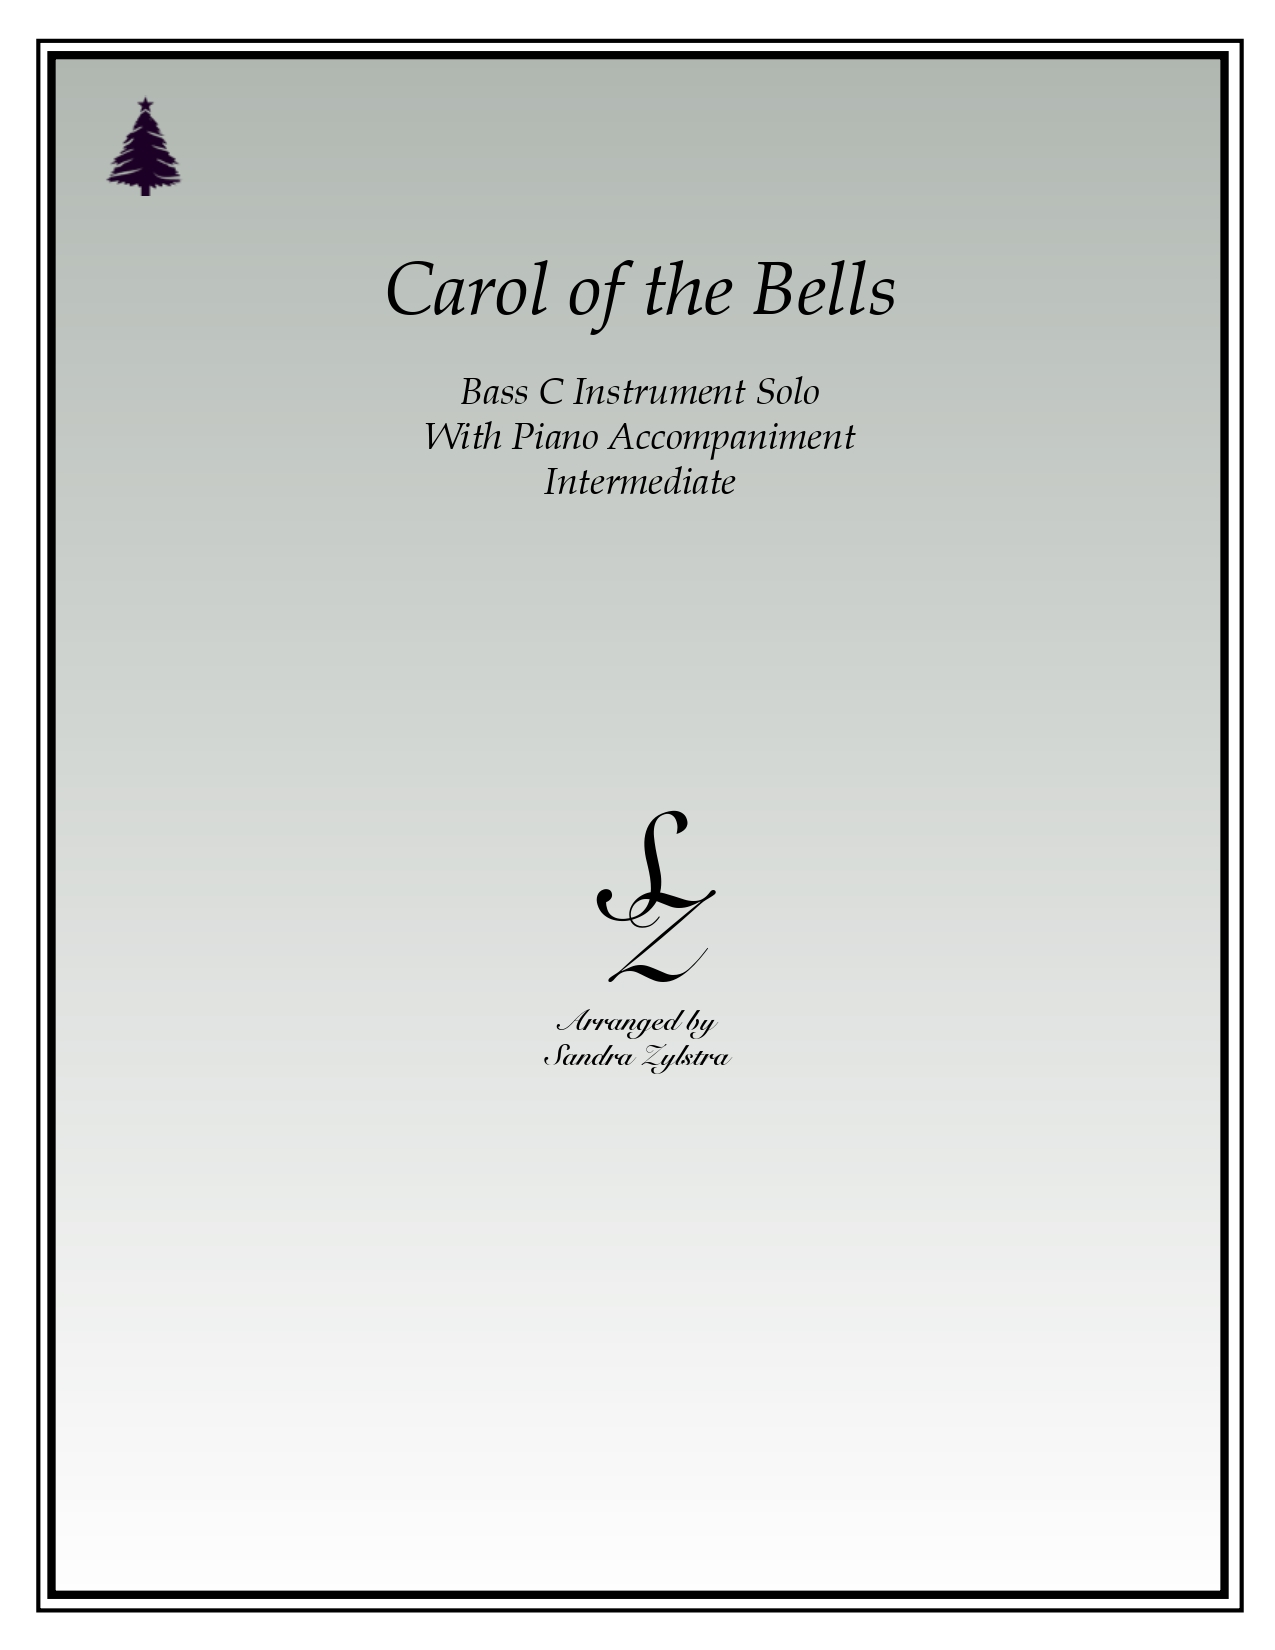 Carol Of The Bells bass C instrument solo part cover page 00011